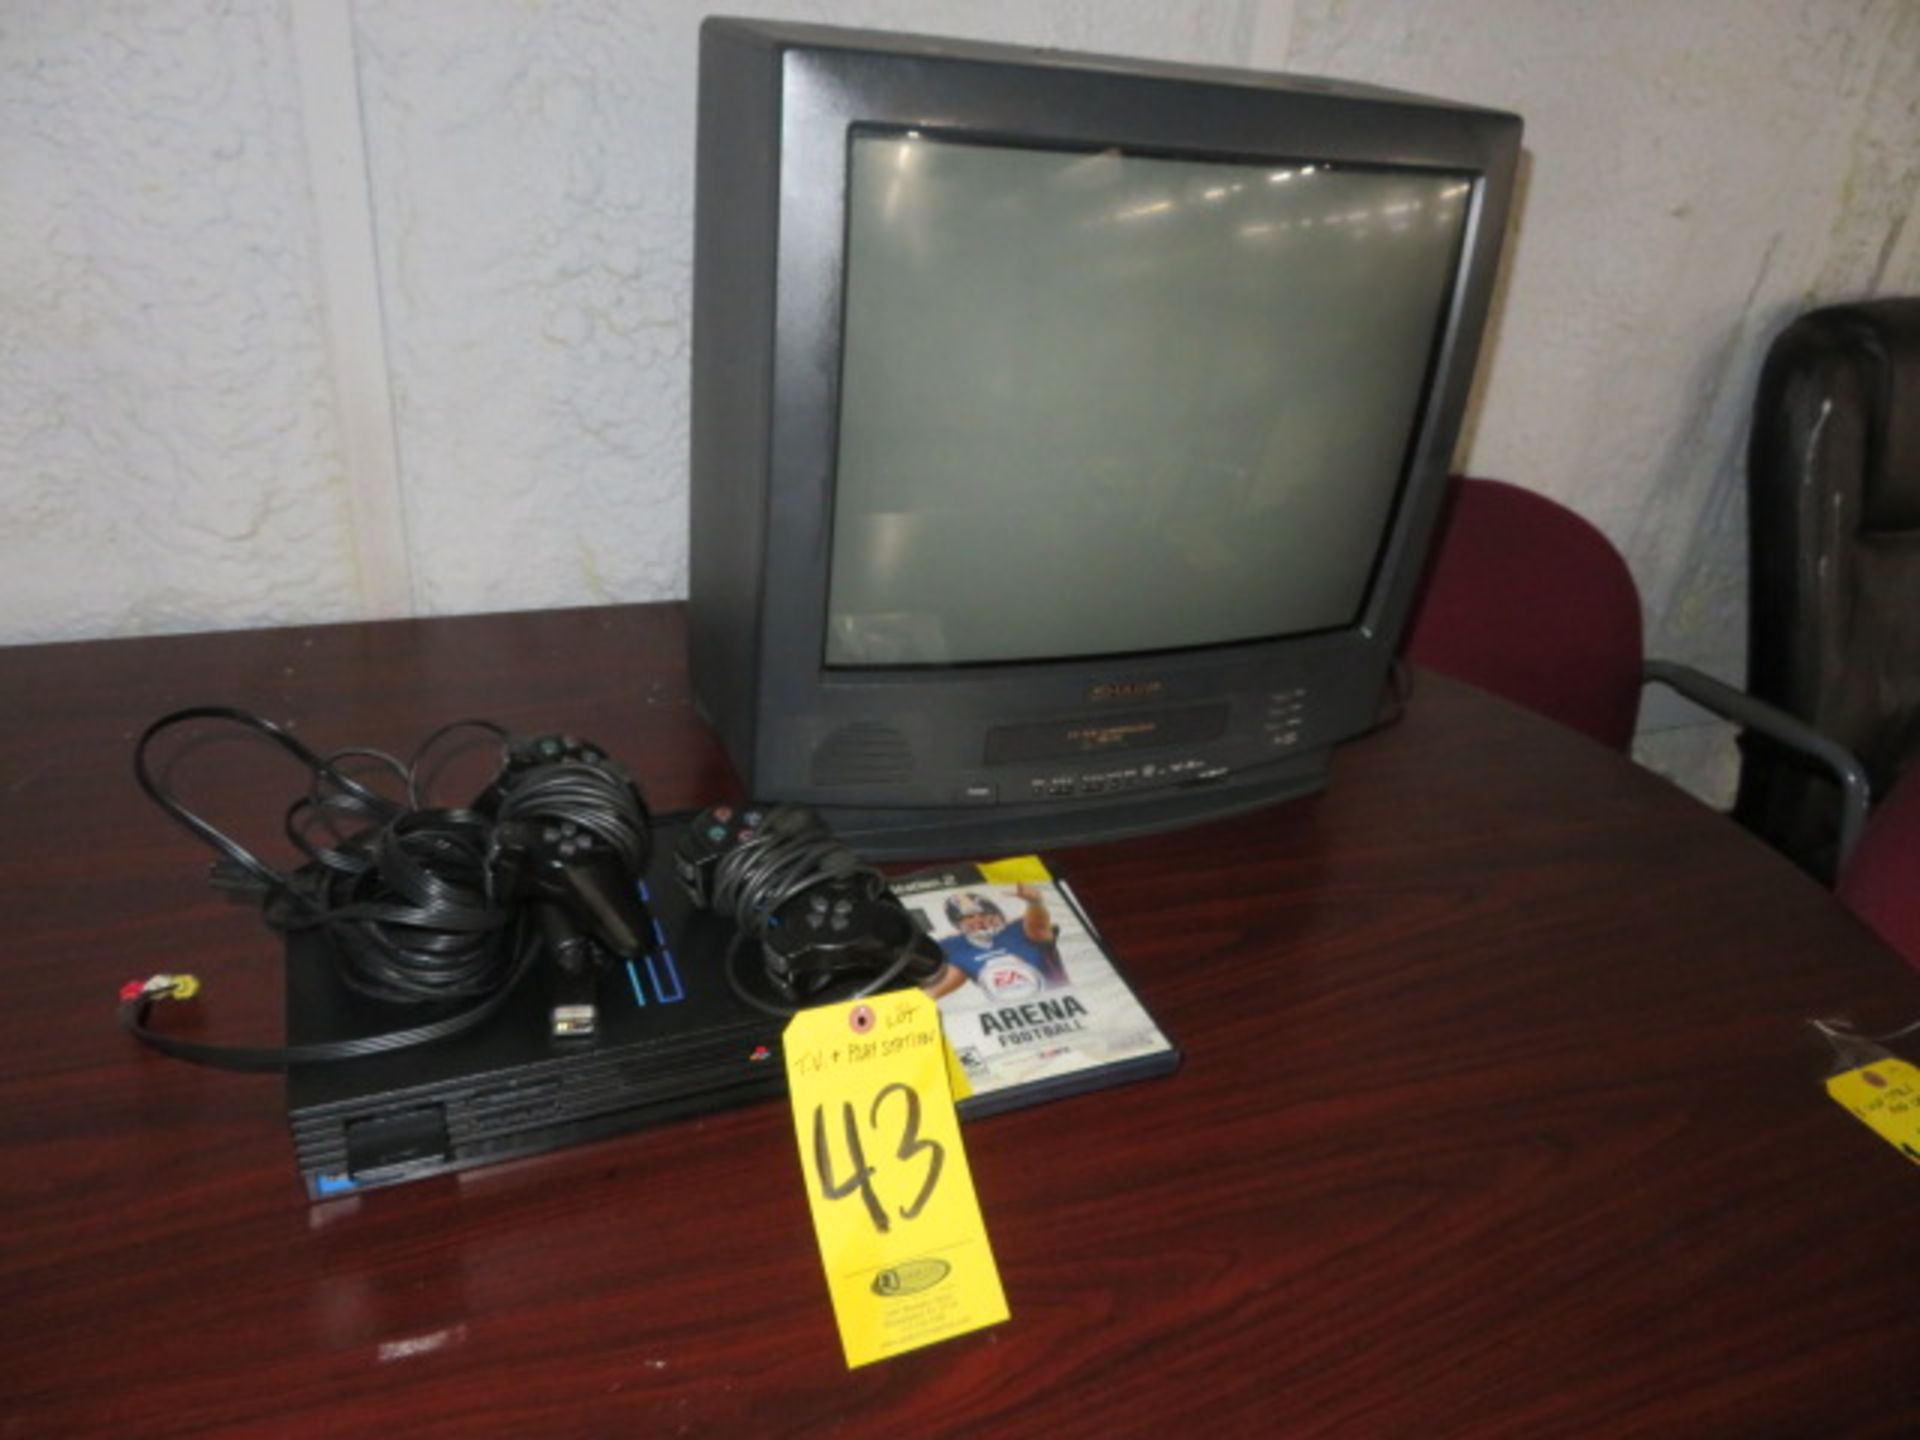 SONY PS2 PLAYSTATION, GAME CONTROLLERS, TAPES AND SHARP TV/VCR COMBO